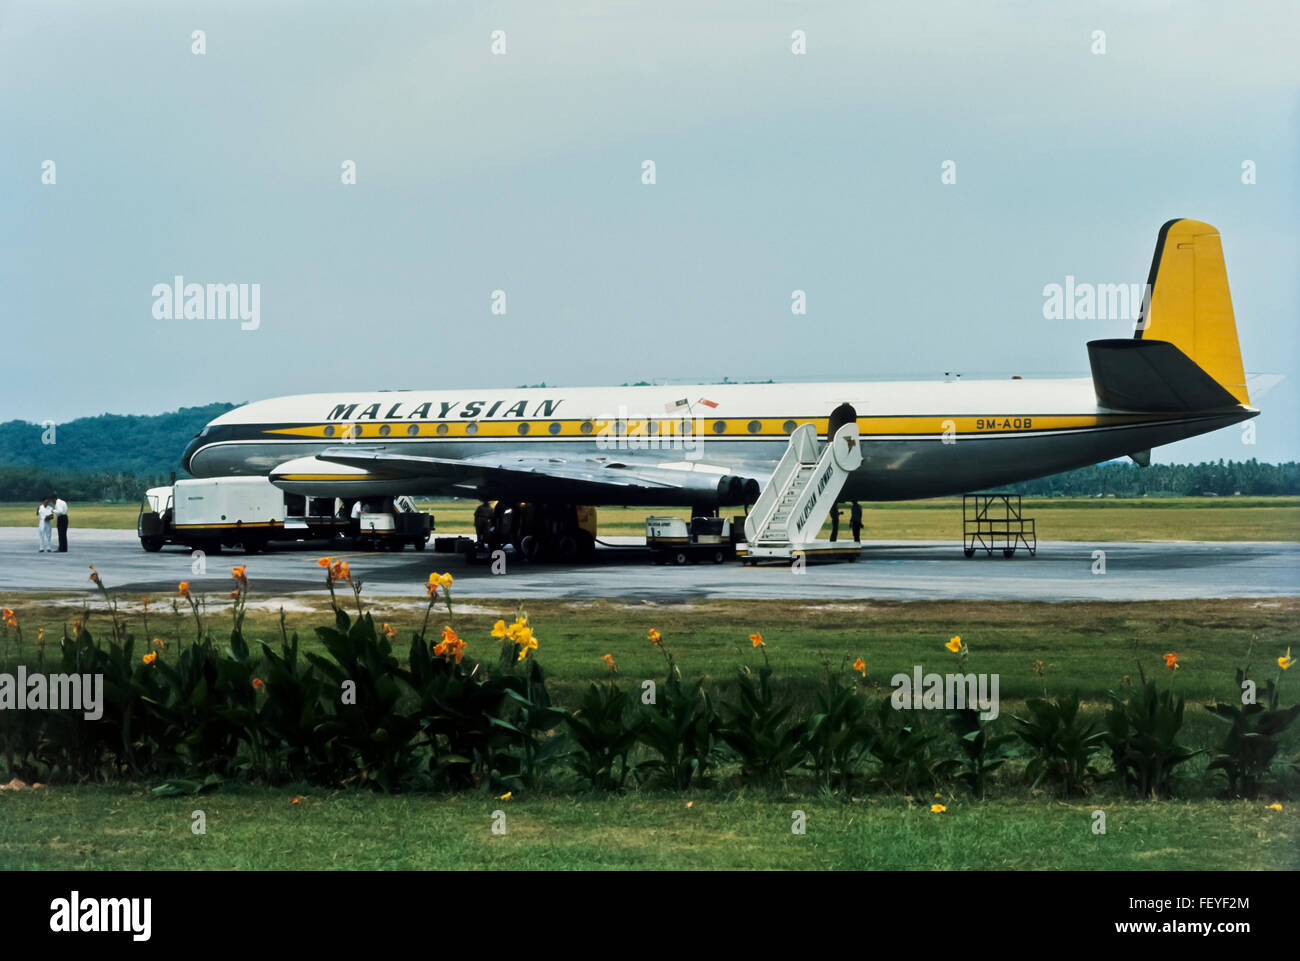 AA 6838. 1960, Archives Malaysian Airways commet, Penang, Malaisie Banque D'Images